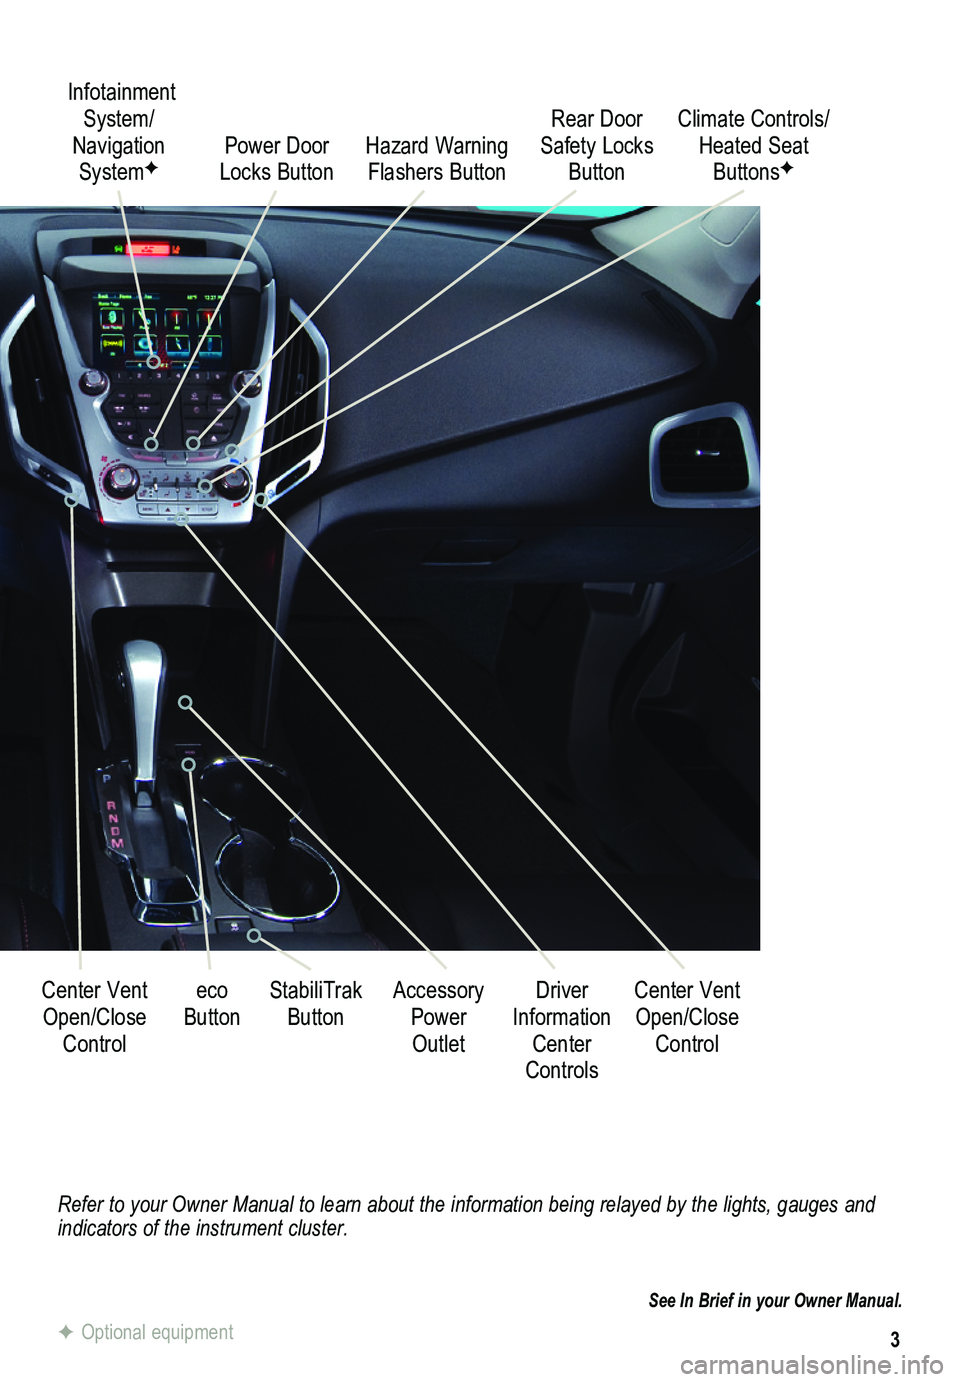 GMC TERRAIN 2014  Get To Know Guide 3
Refer to your Owner Manual to learn about the information being relayed \
by the lights, gauges and indicators of the instrument cluster.
See In Brief in your Owner Manual.
 Infotainment System/ Nav